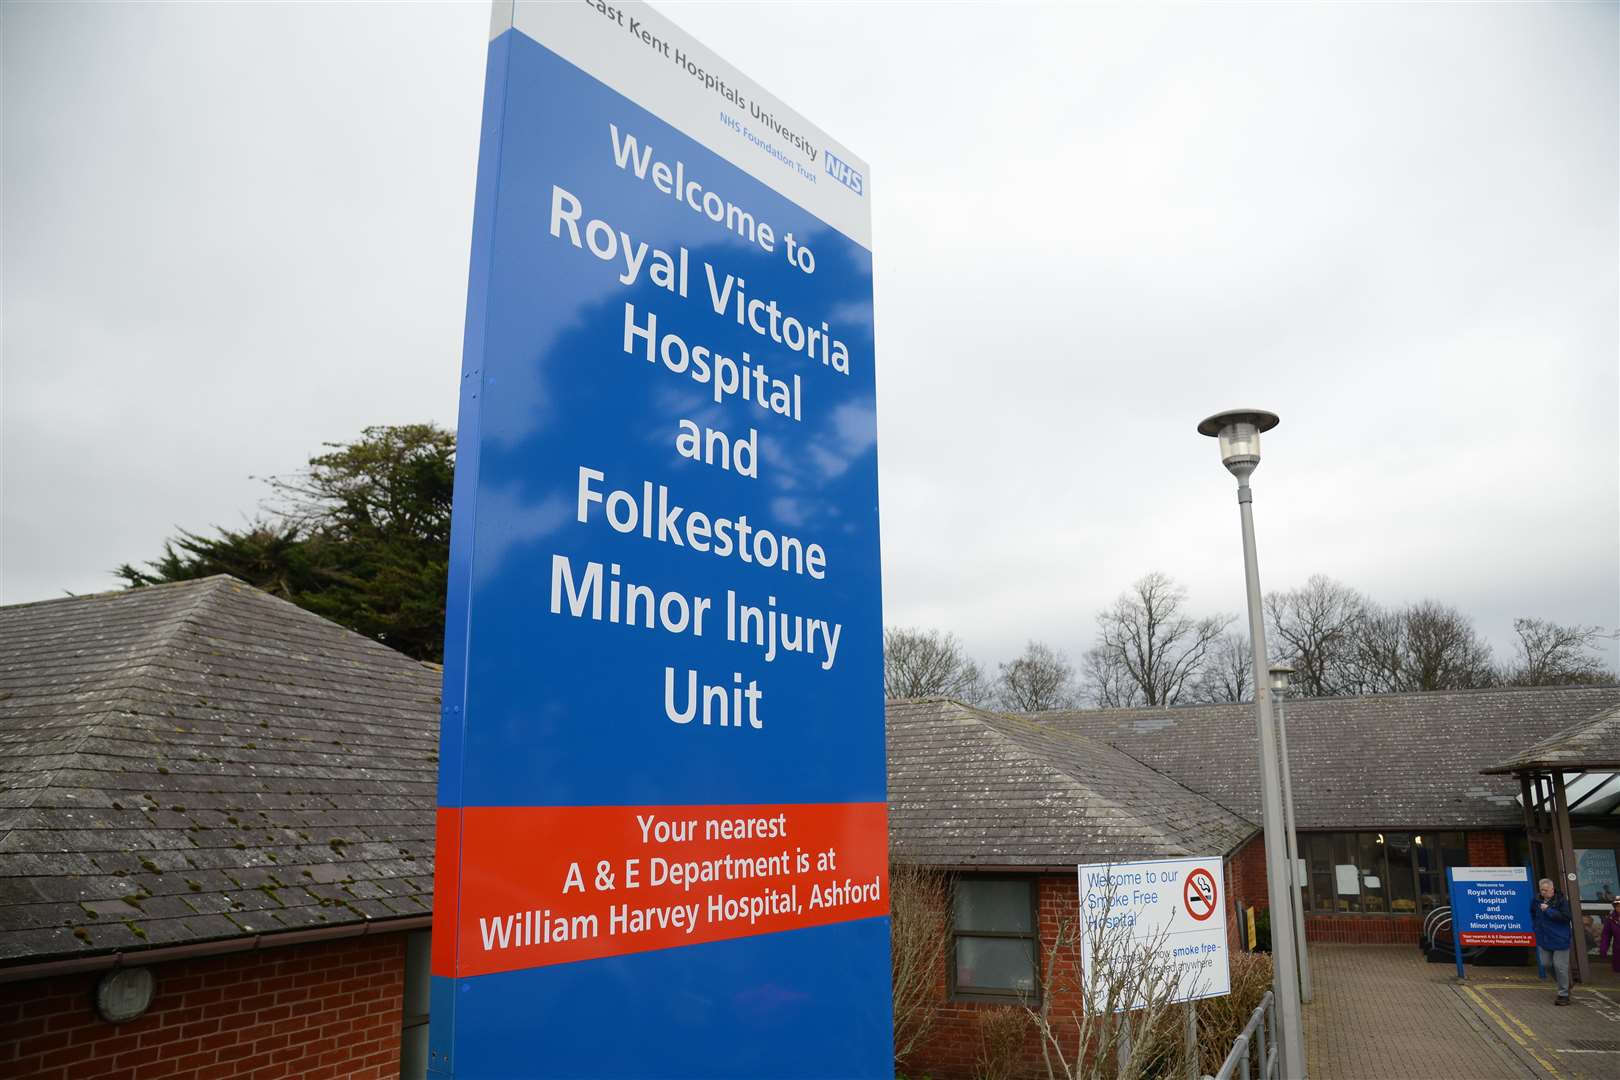 The Royal Victoria Hospital in Folkestone has a busy walk-in centre